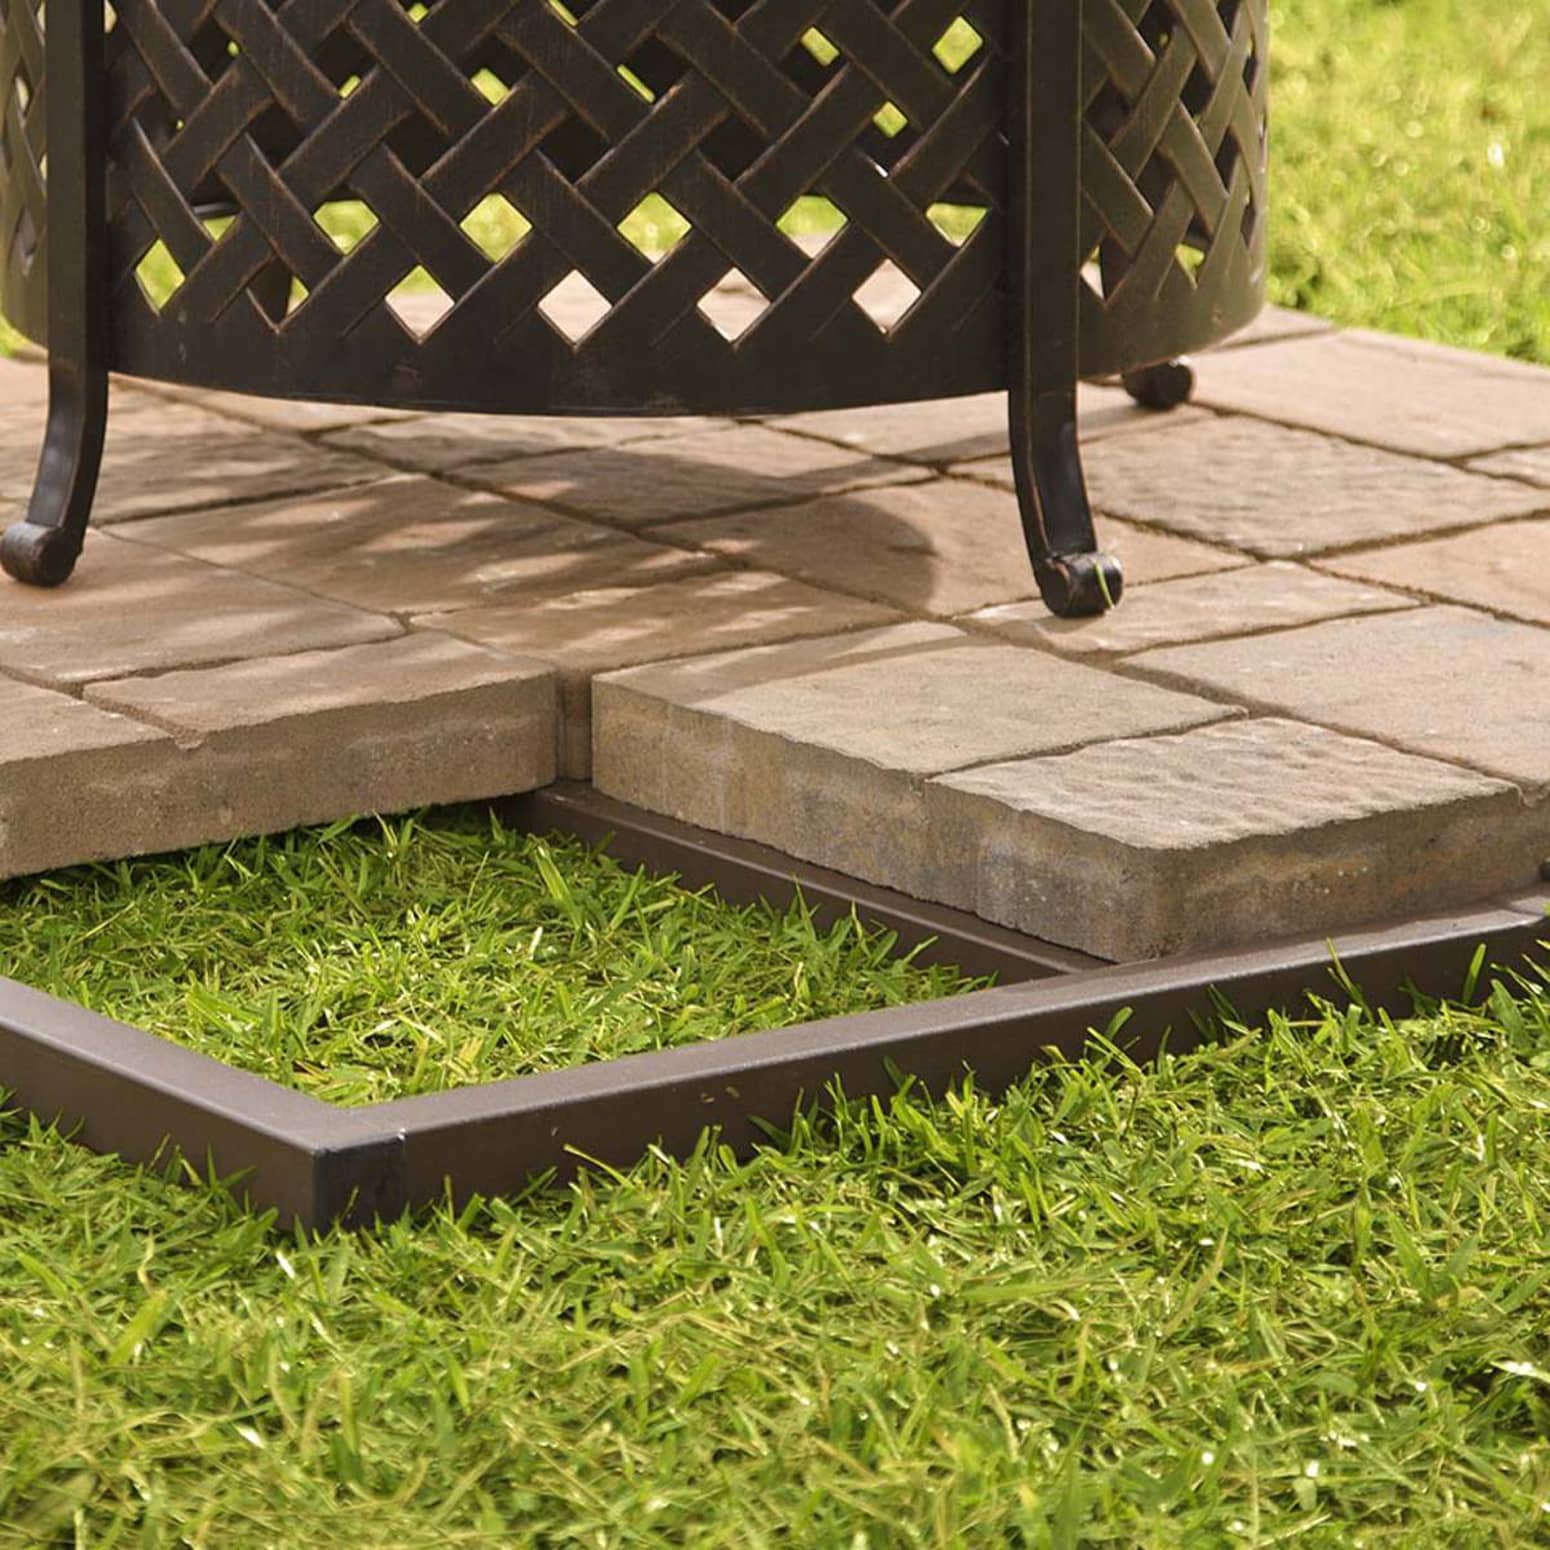 Fire Pit Safety Base, Can You Place Fire Pit On Grass